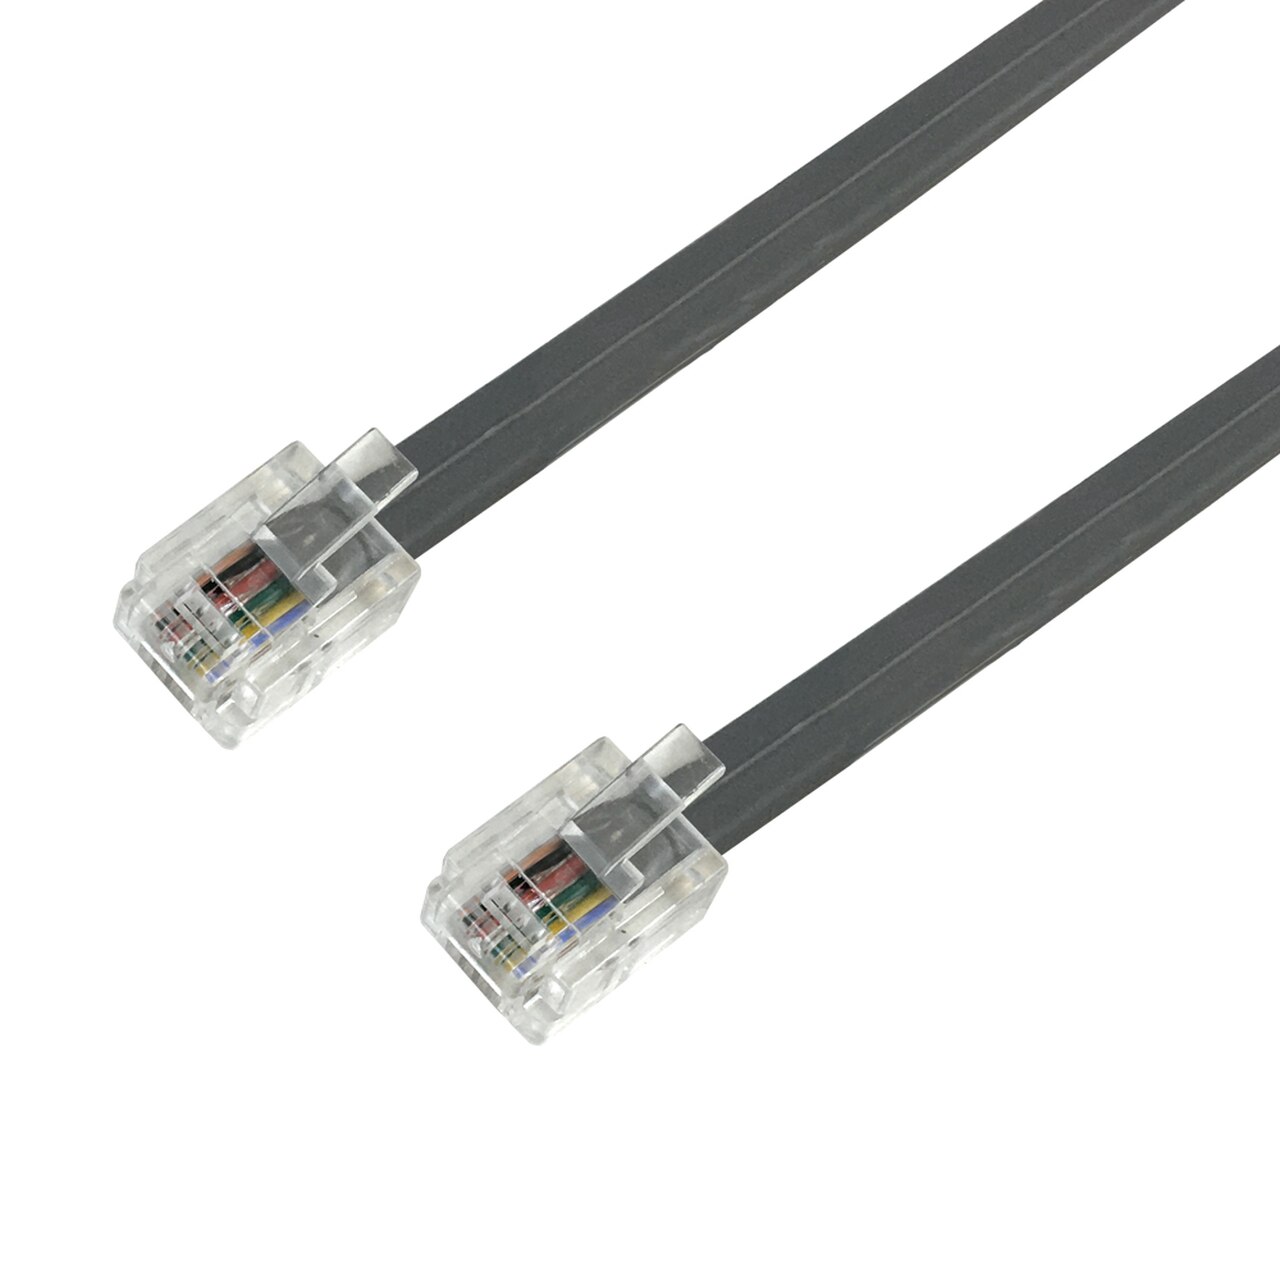 HF-CSS6P4C: 1 to 15 ft RJ11 Modular Data Telephone Cable Straight Through 6P4C - 28AWG - Silver Stain